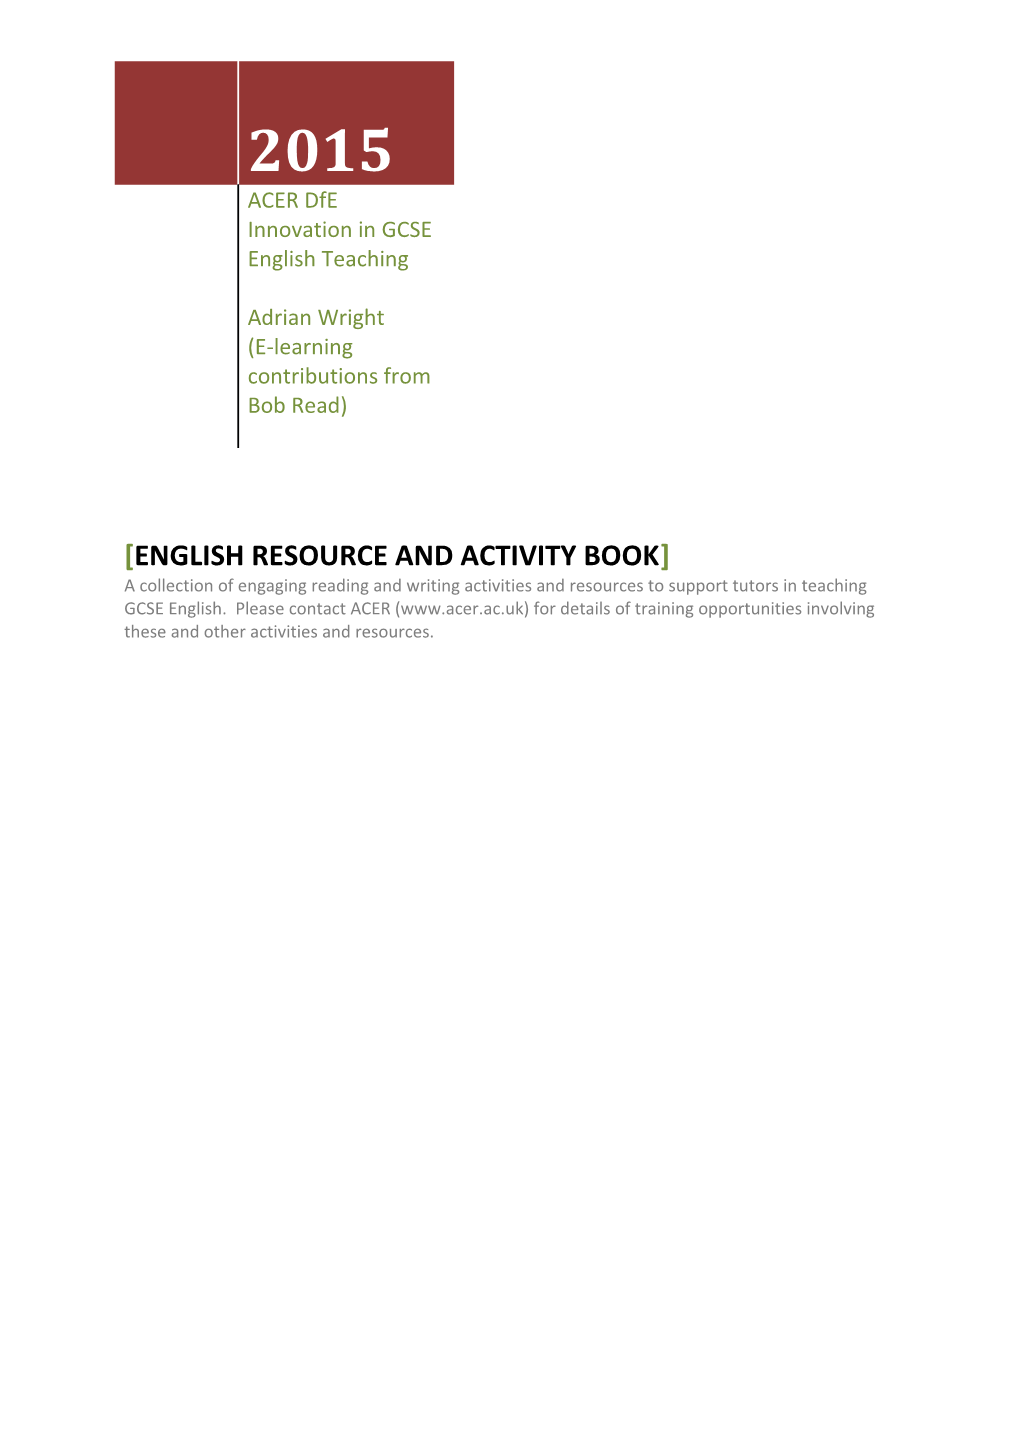 English Resource and Activity Book